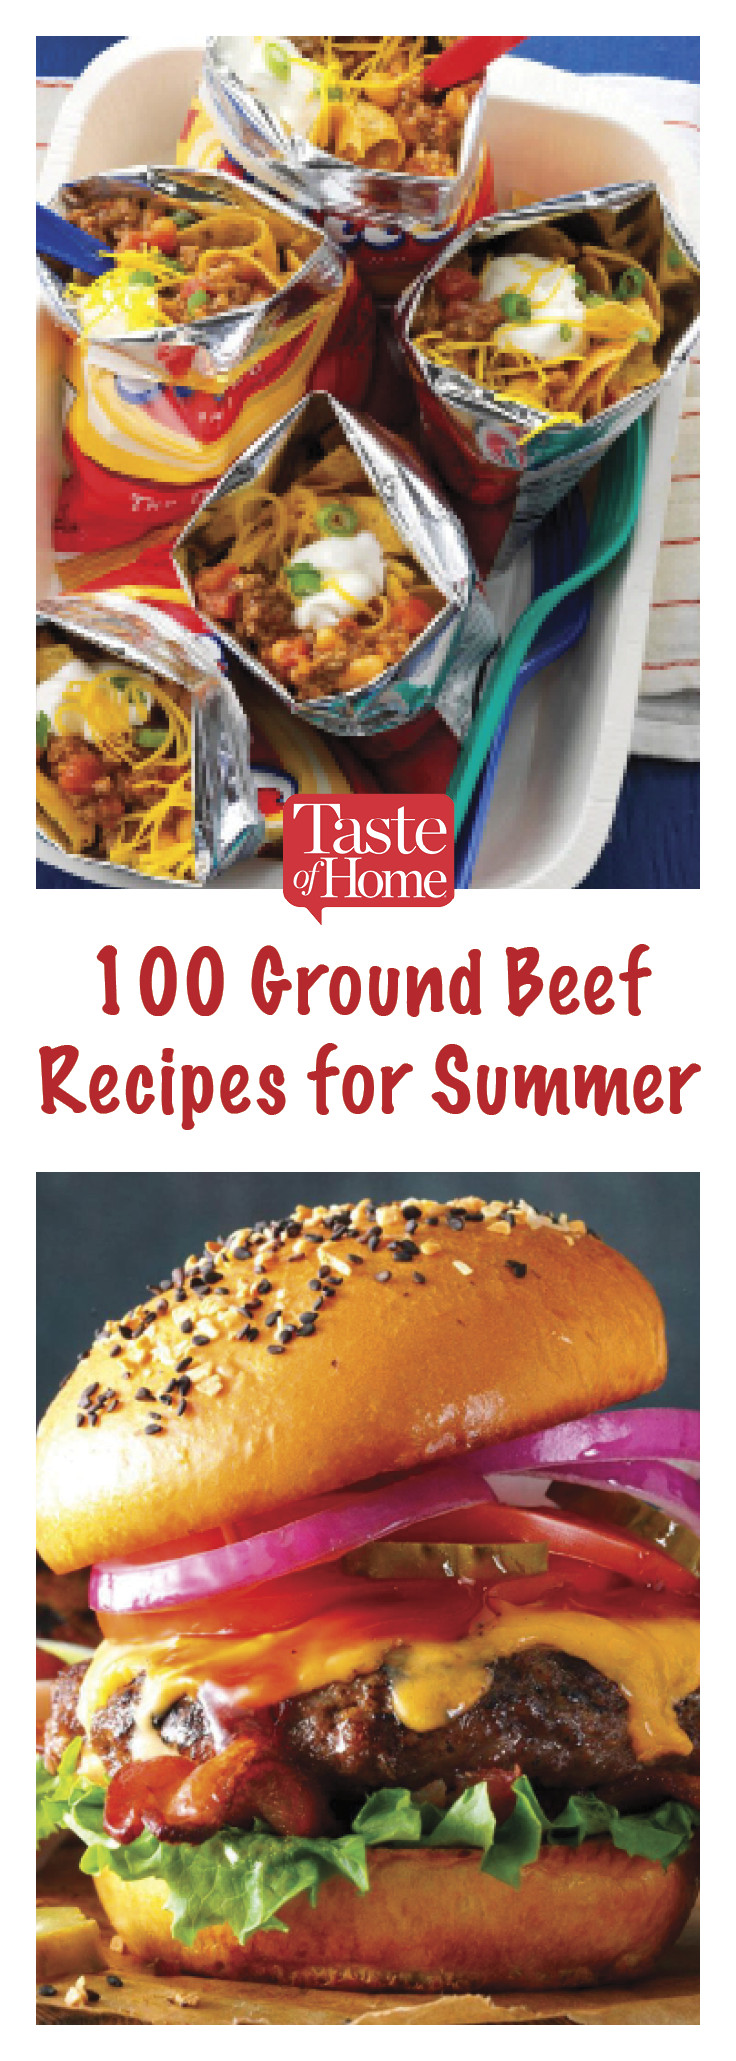 Ground Beef Summer Recipe
 100 Ground Beef Recipes to Eat All Summer Long